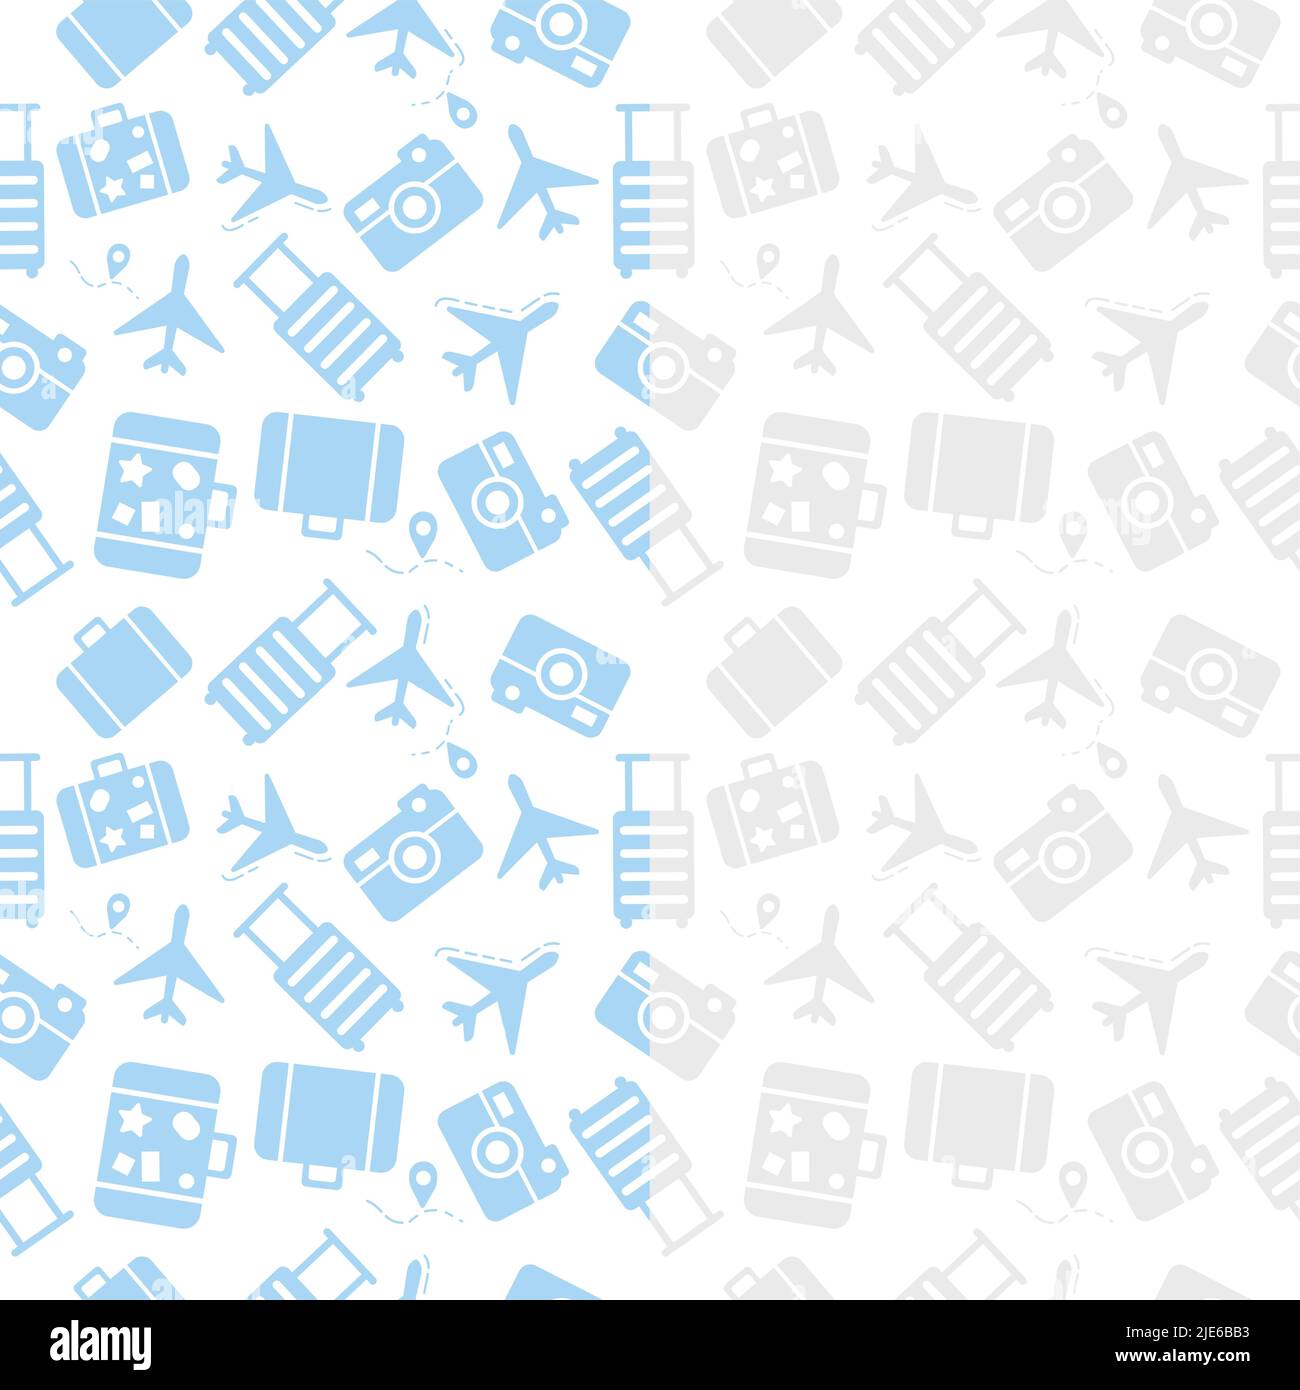 Travel pattern made from airplane camera icons Stock Vector